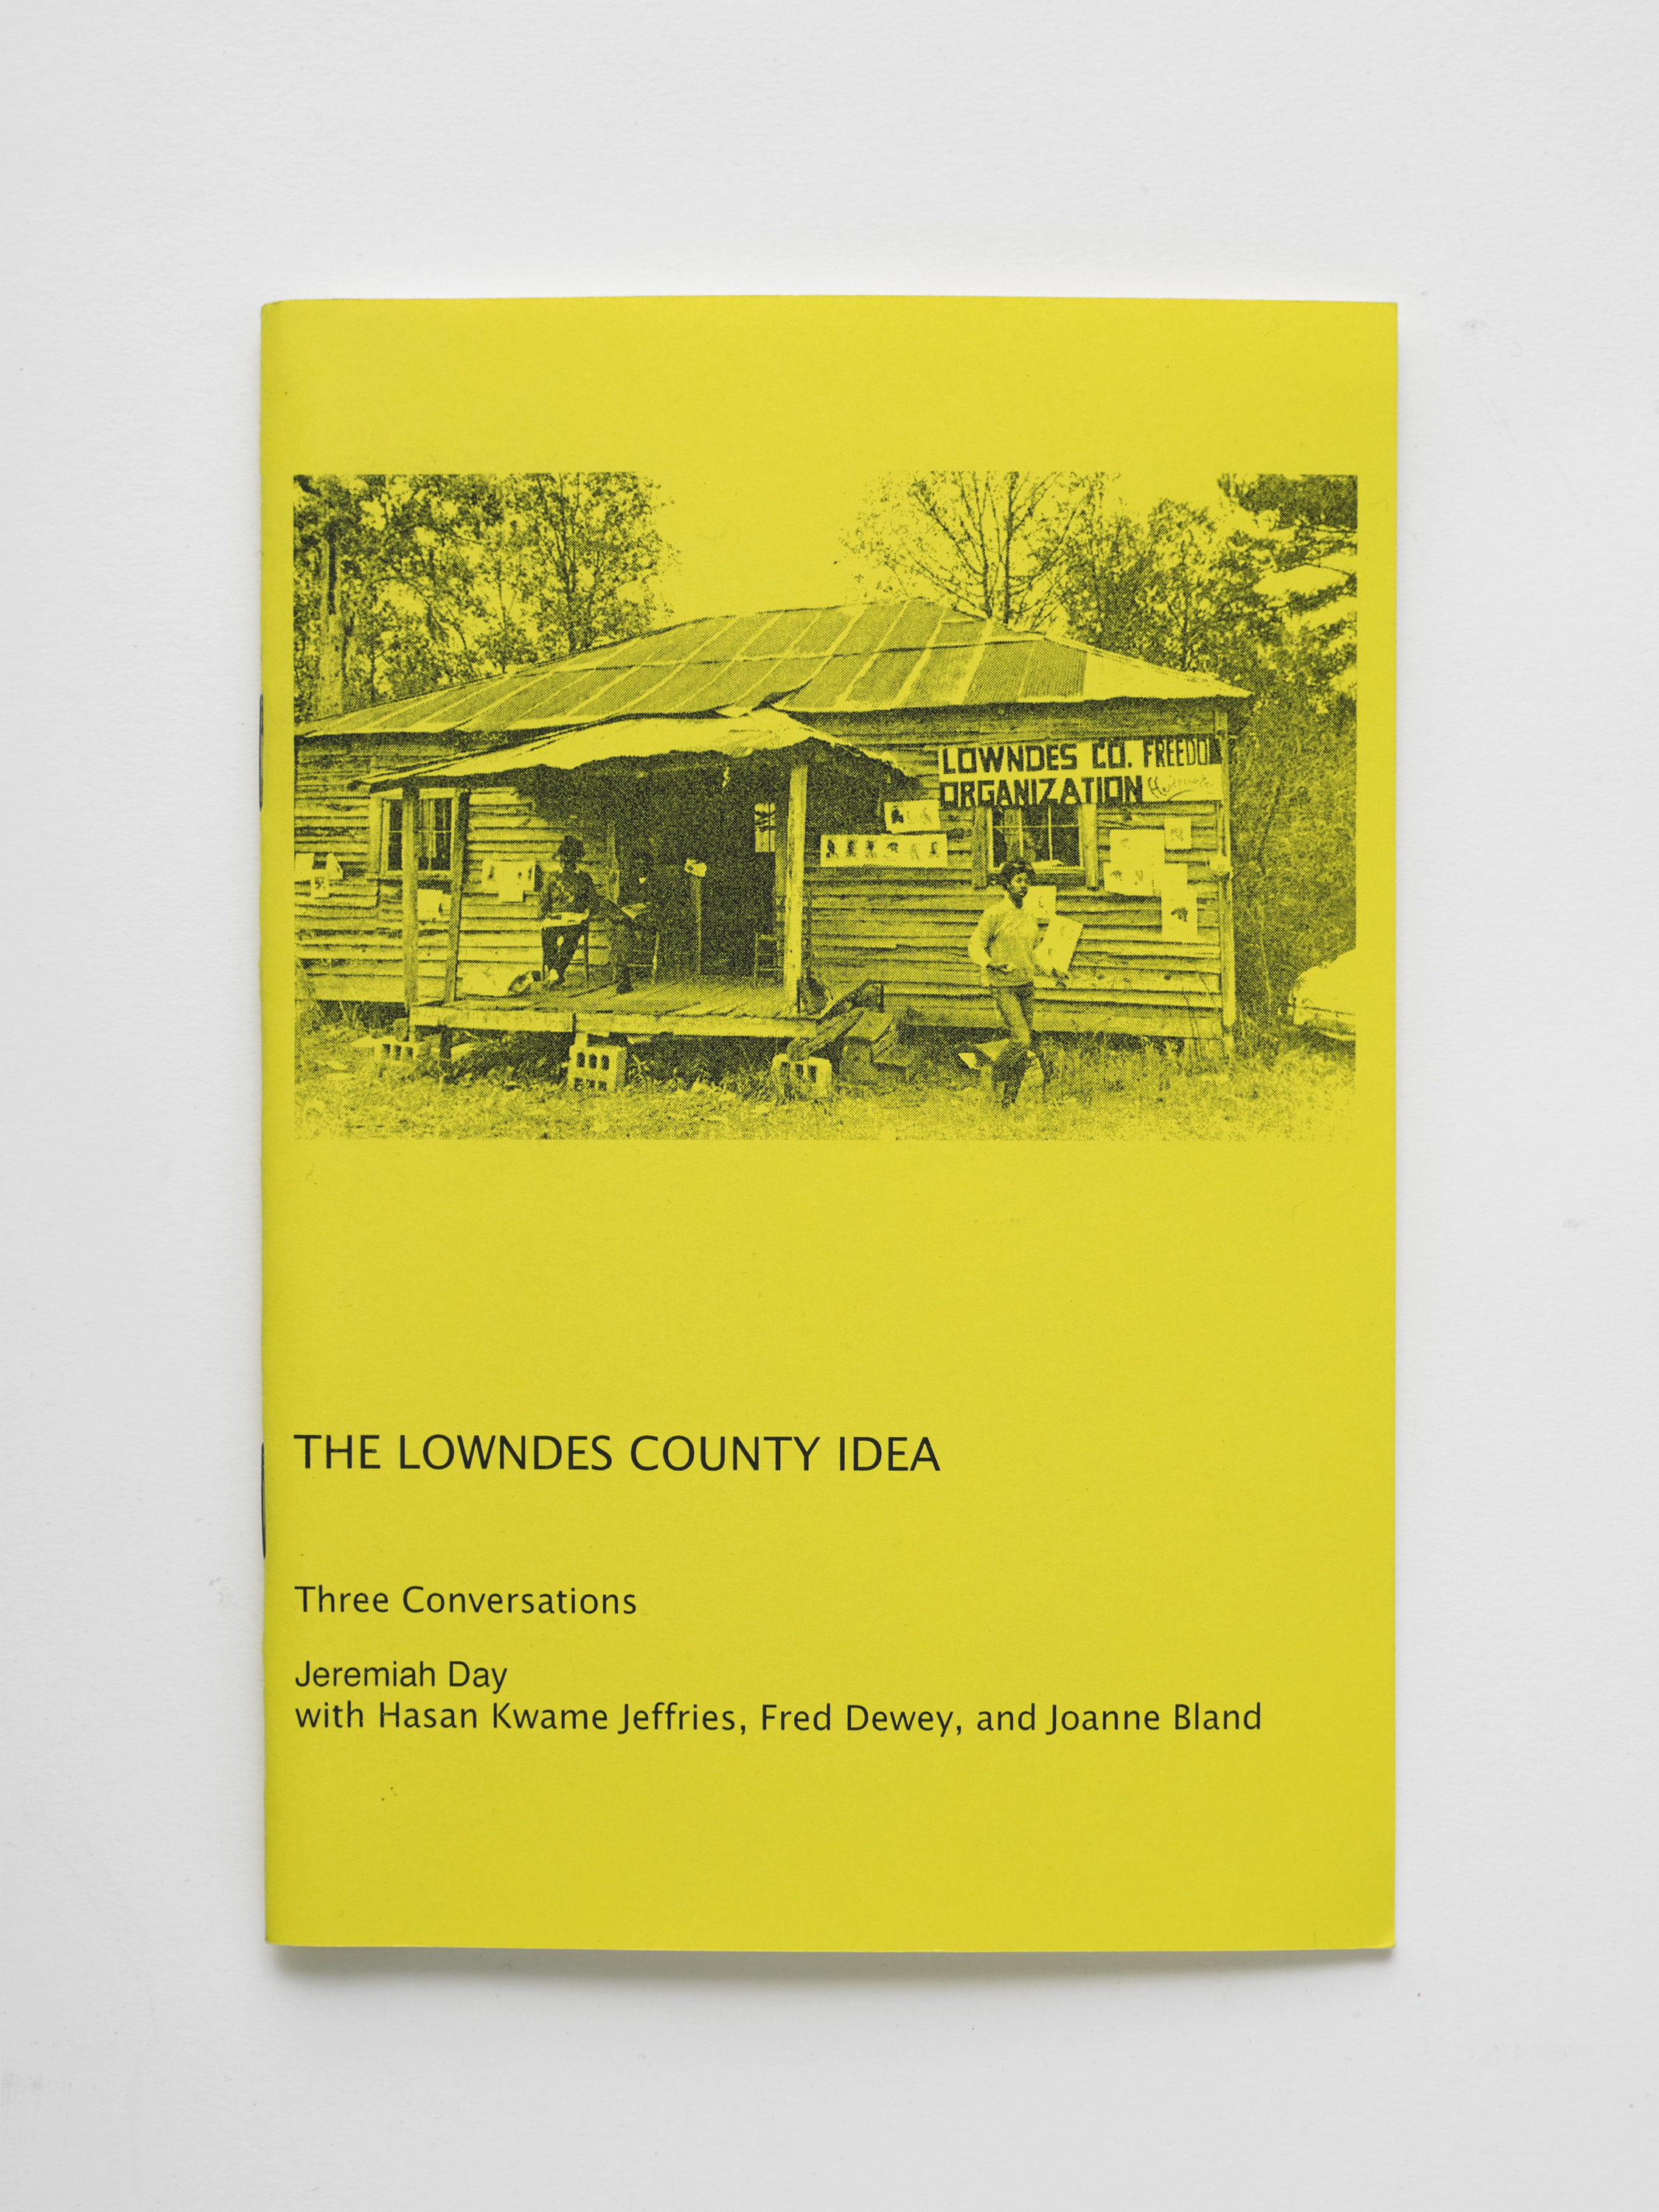  Jeremiah Day with Hasan Kwame Jeffries, Fred Dewey, and JoAnne Bland The Lowndes County Idea: Three Conversations Booklet, 2008 ( What is Power?  14)